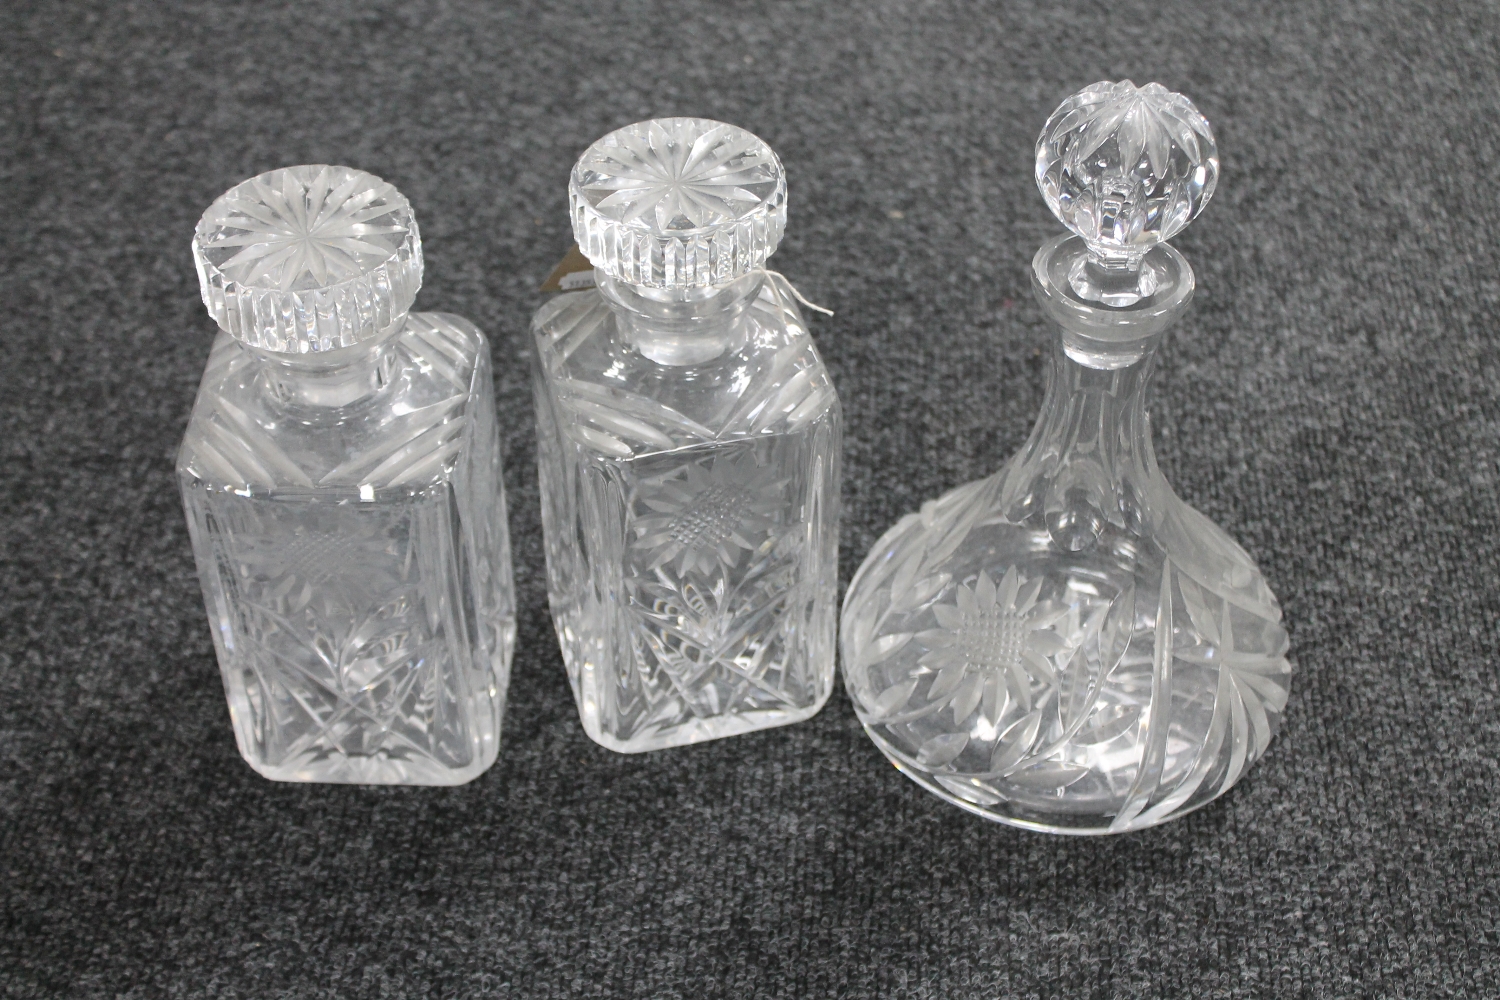 Two lead crystal whisky decanters together with one other decanter